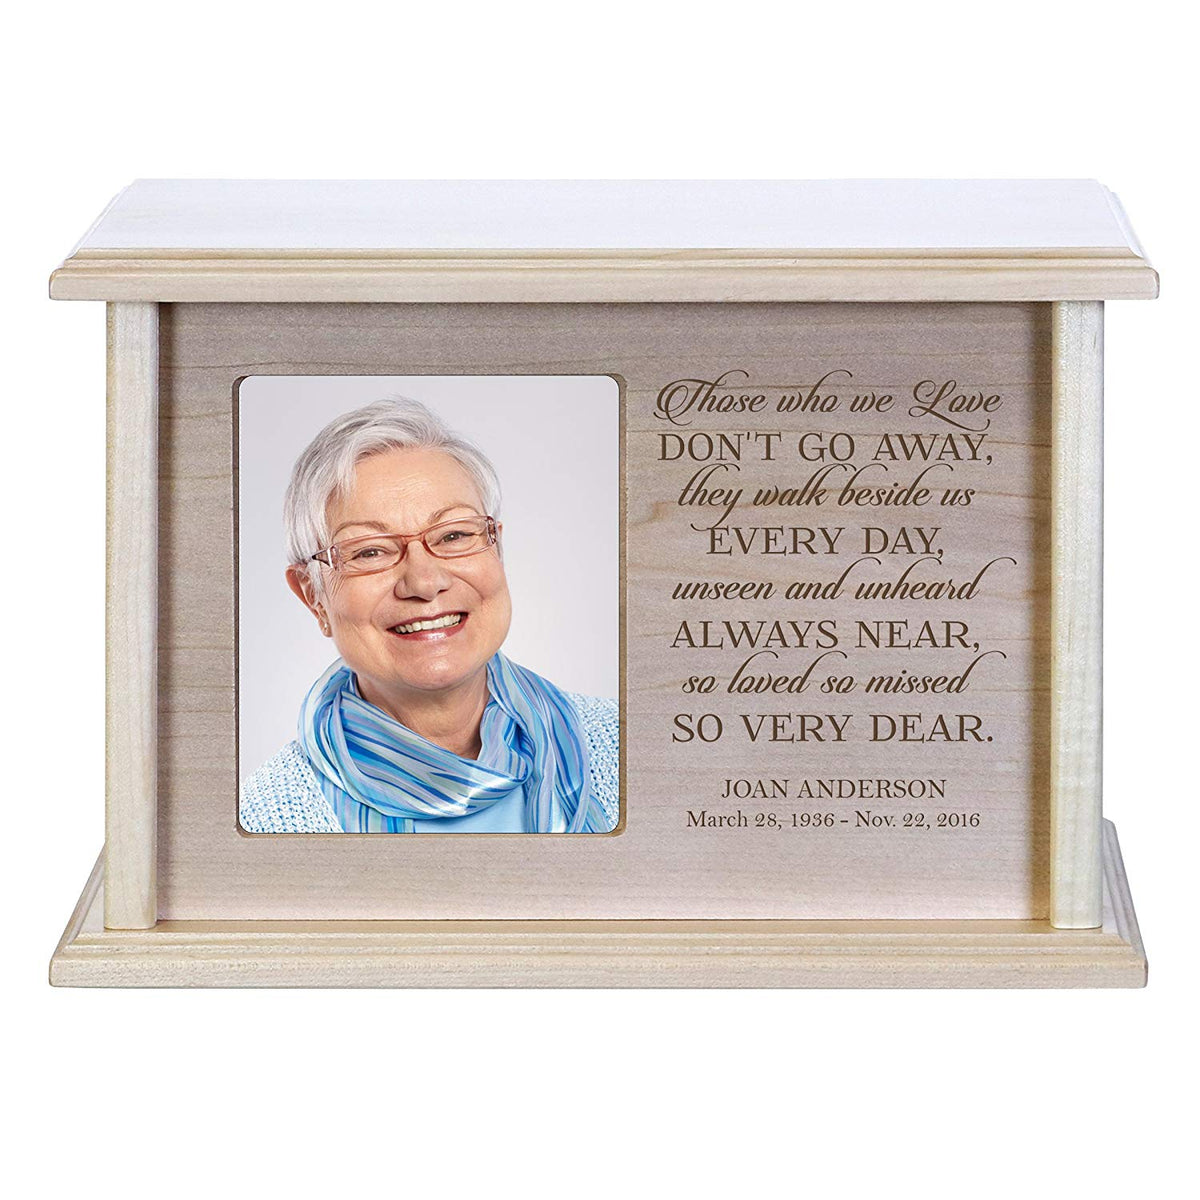 Custom Engraved Solid Wood Cremation Urn Box with 4x6 Photo holds 200 cu in of Human Ashes Those Who We Love - LifeSong Milestones